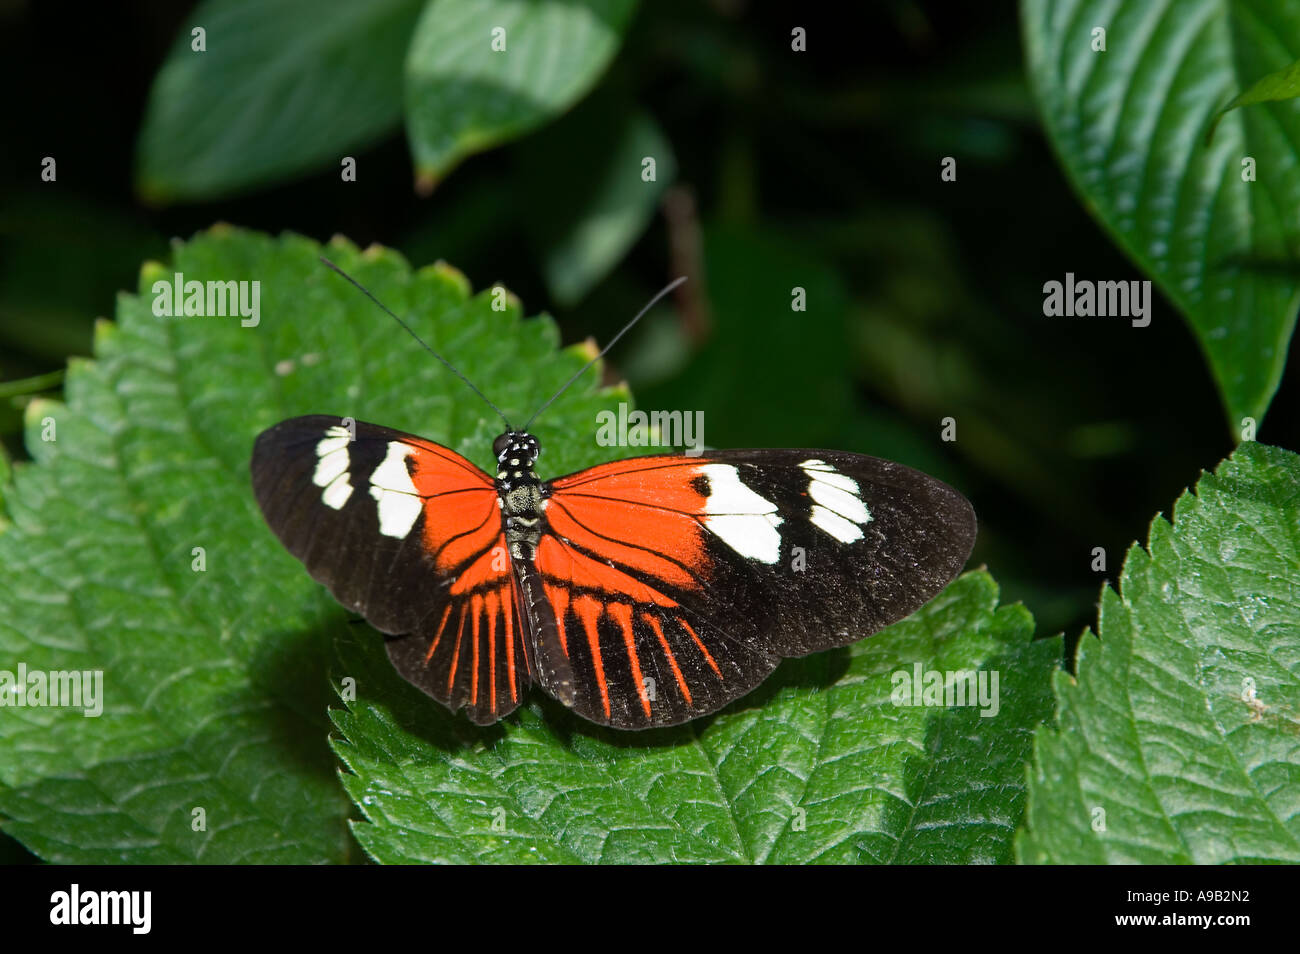 Amazonian Rayed Butterfly (Heliconius aoede) Stock Photo